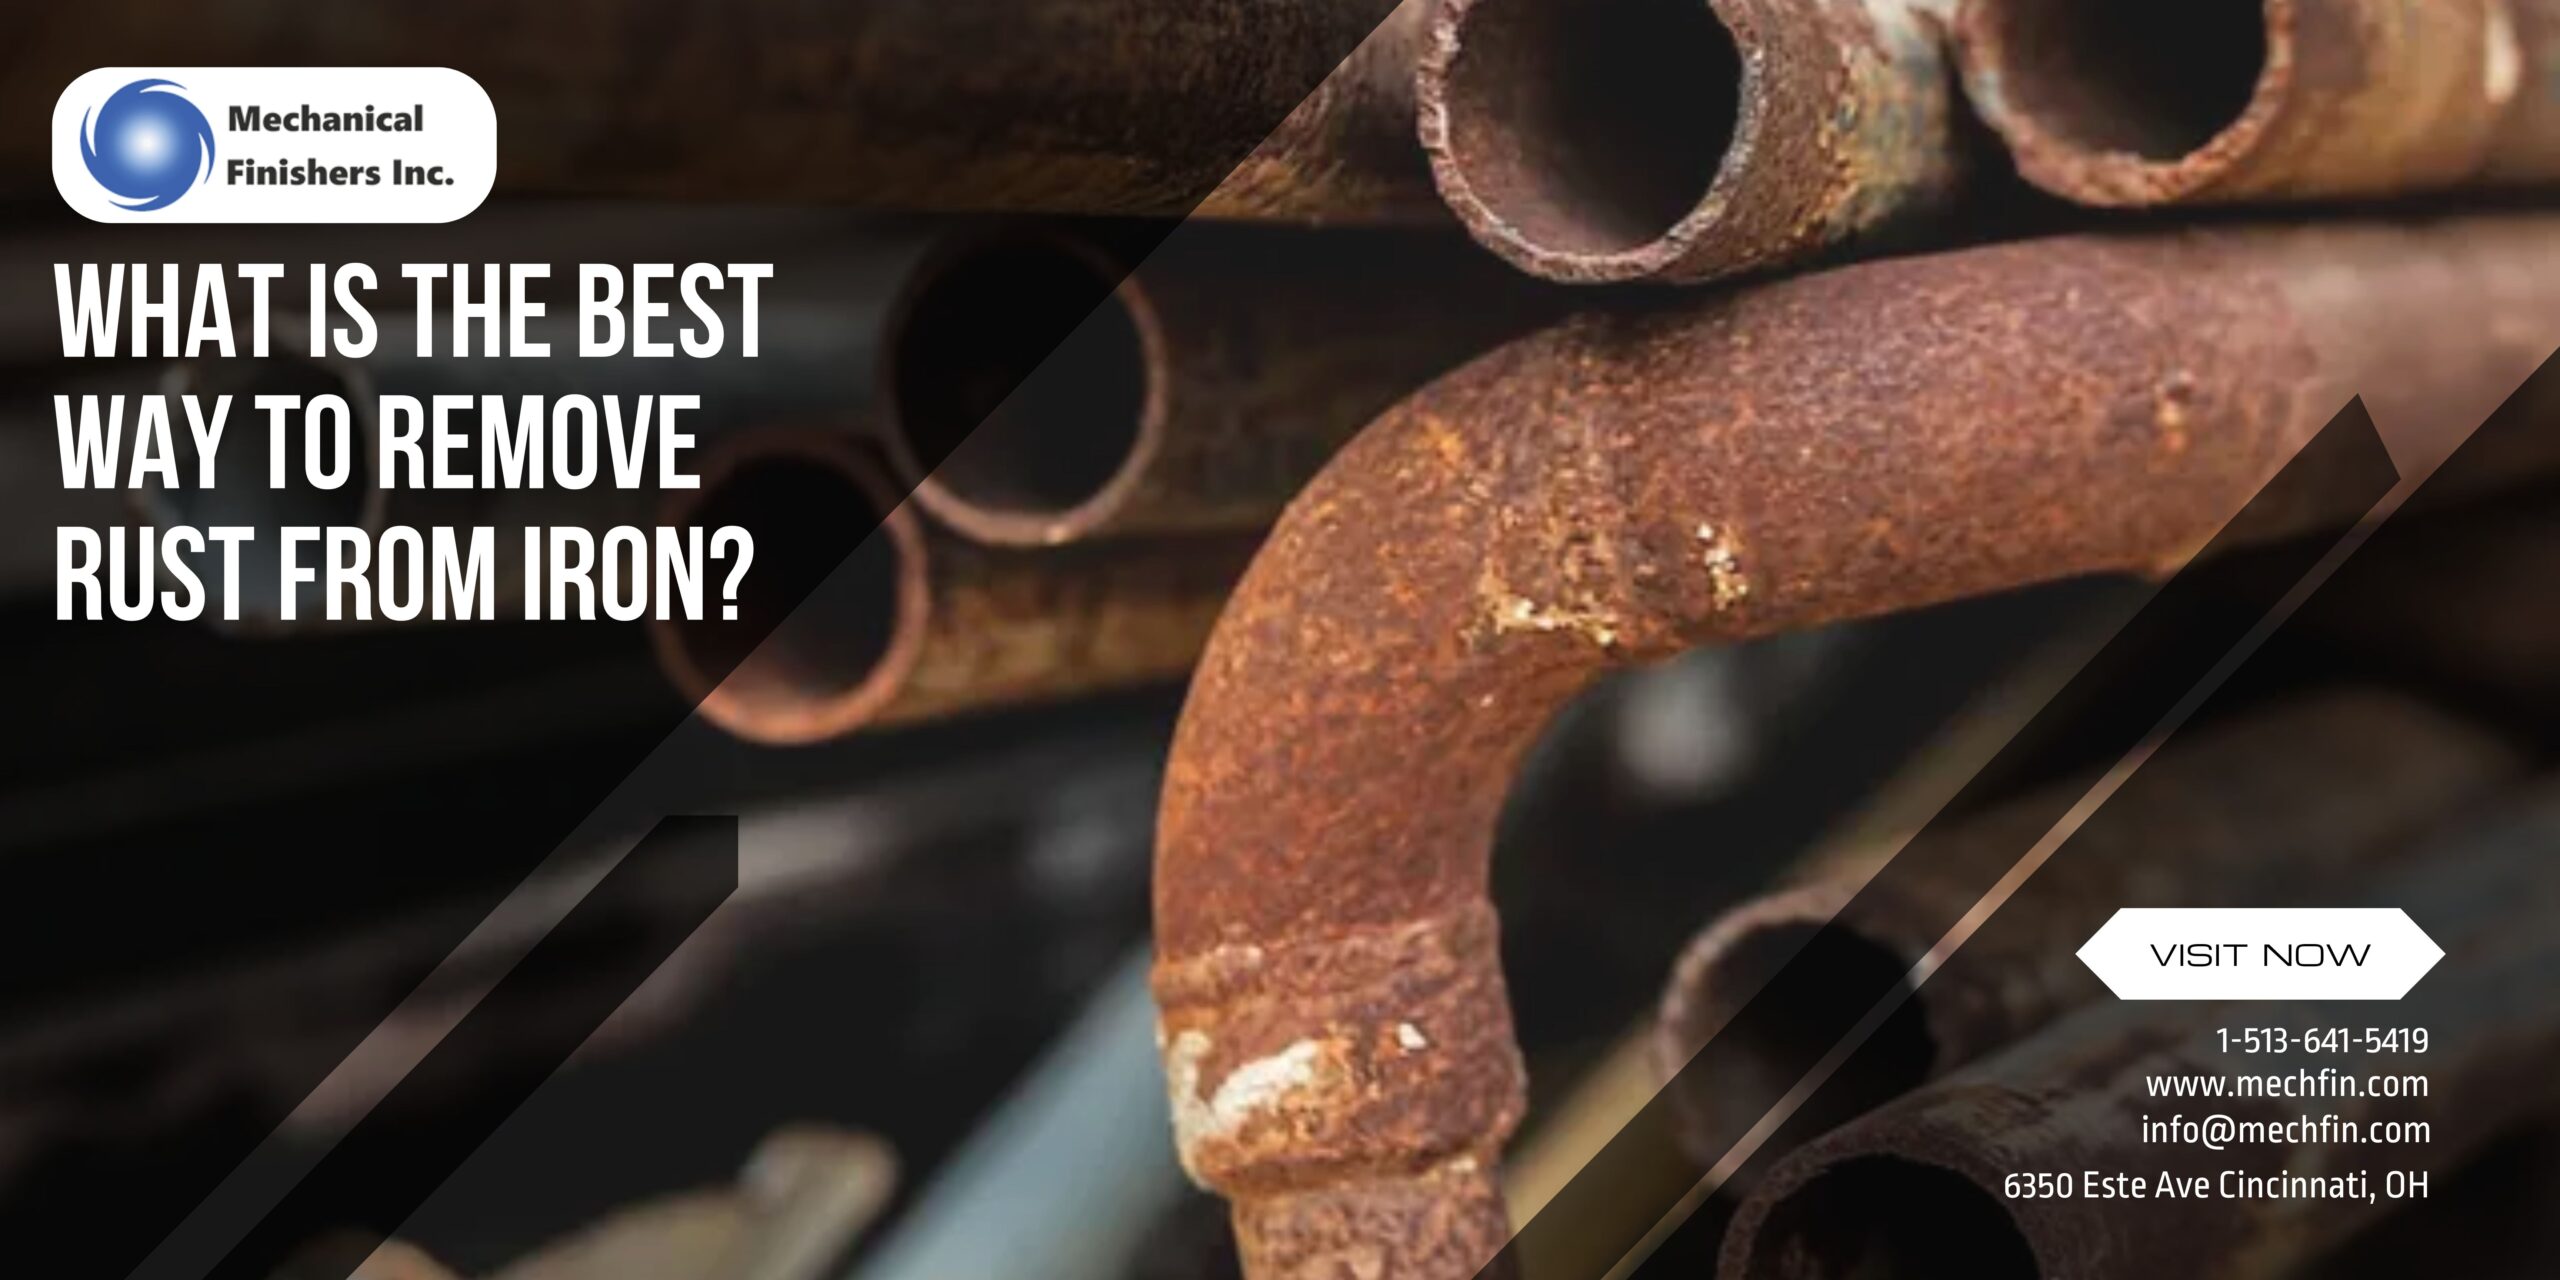 What is the Best Way to Remove Rust from Iron?